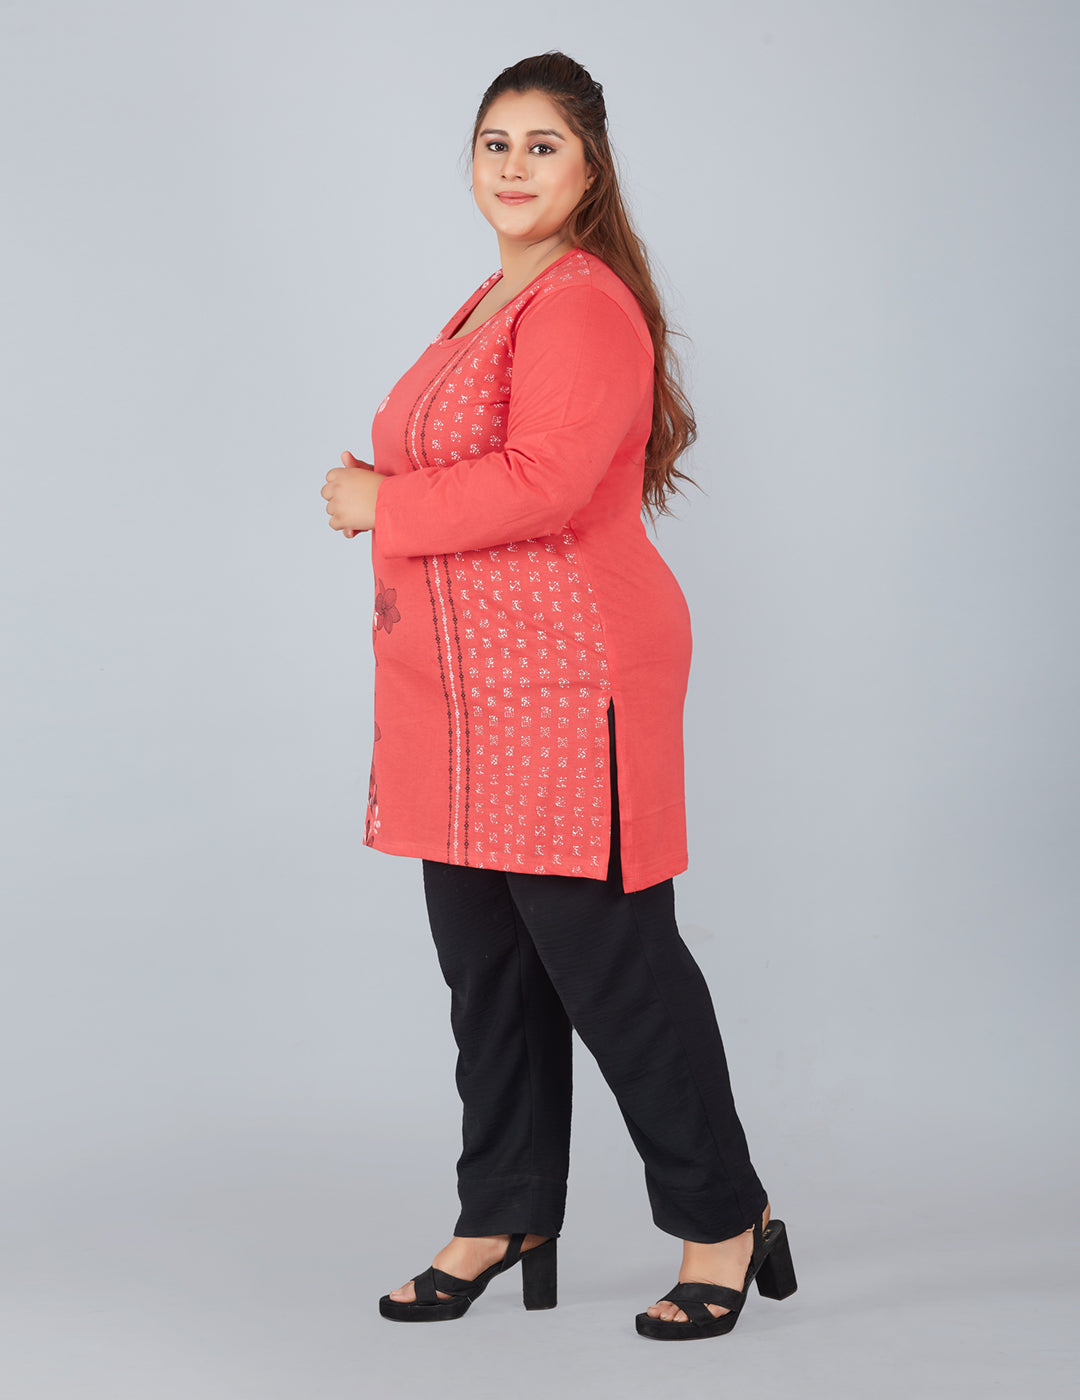 Cotton Long Top for Women Plus Size - Full Sleeve - Red